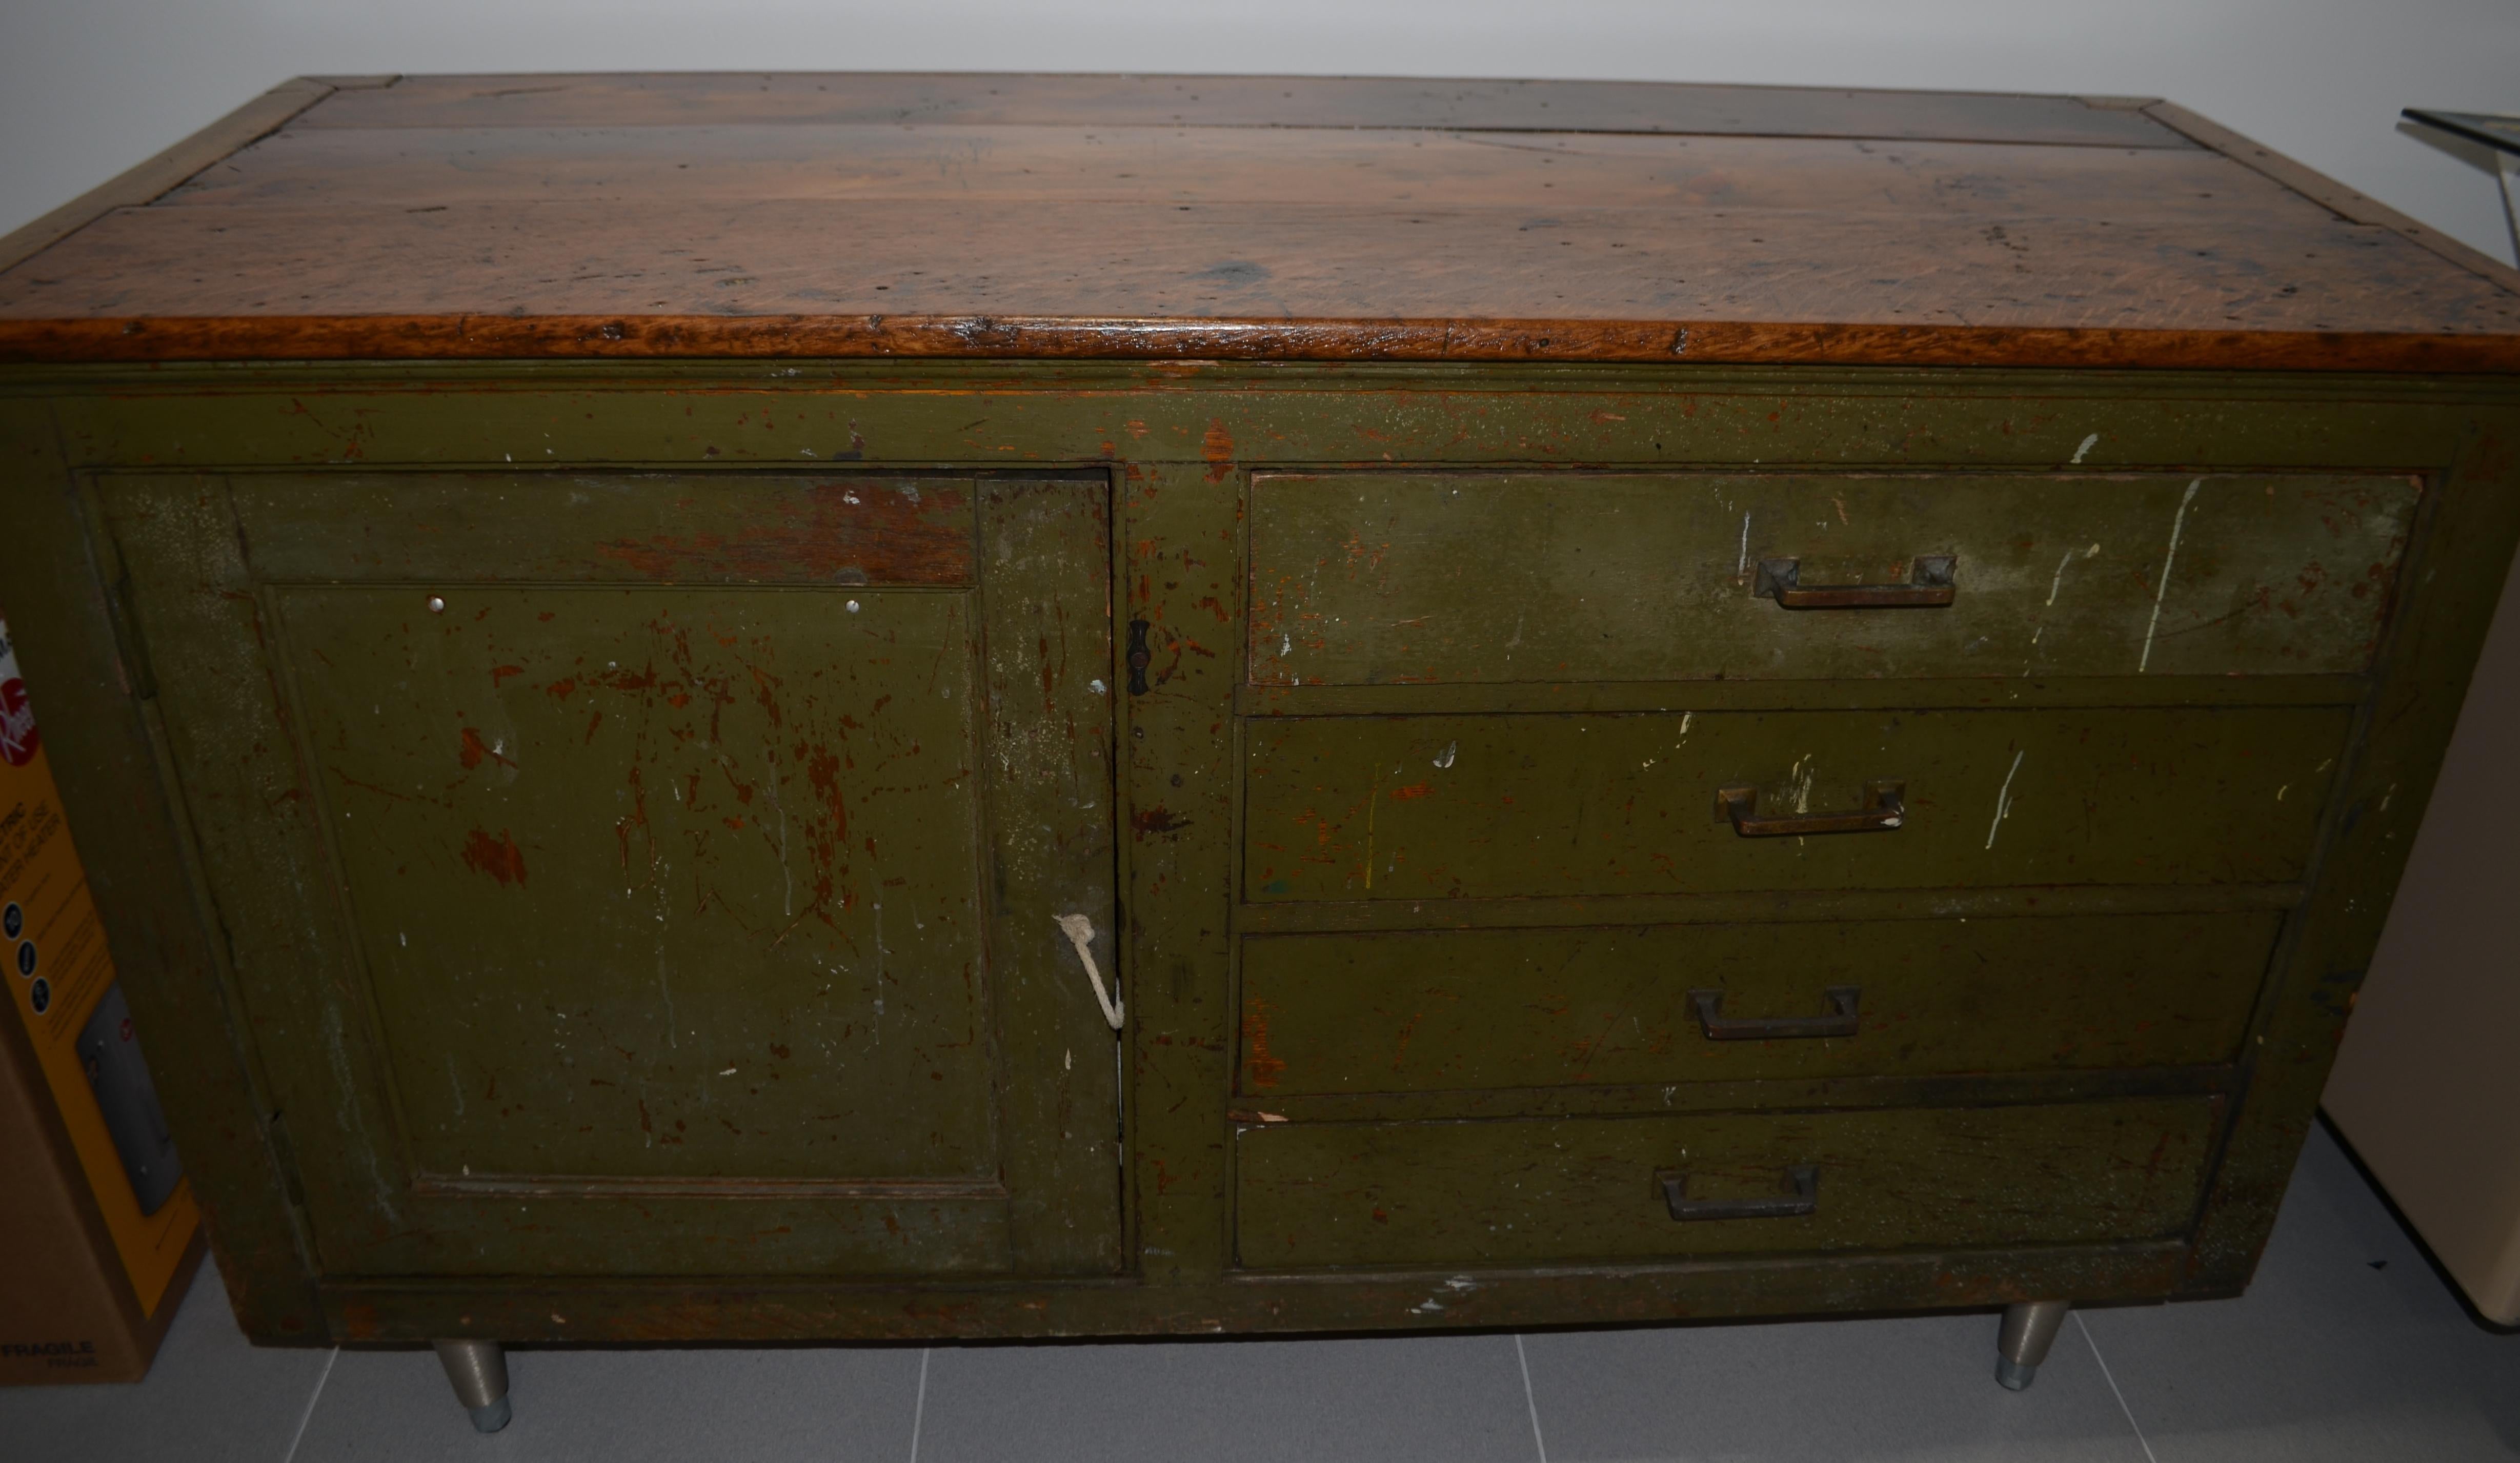 Primitive cabinet with four drawers built in along with storage cabinet. Original earthen green color plus softly worn and richly mahoganized pine top. Good storage space behind door plus four drawers. Original pull cord. Steel legs added. Would